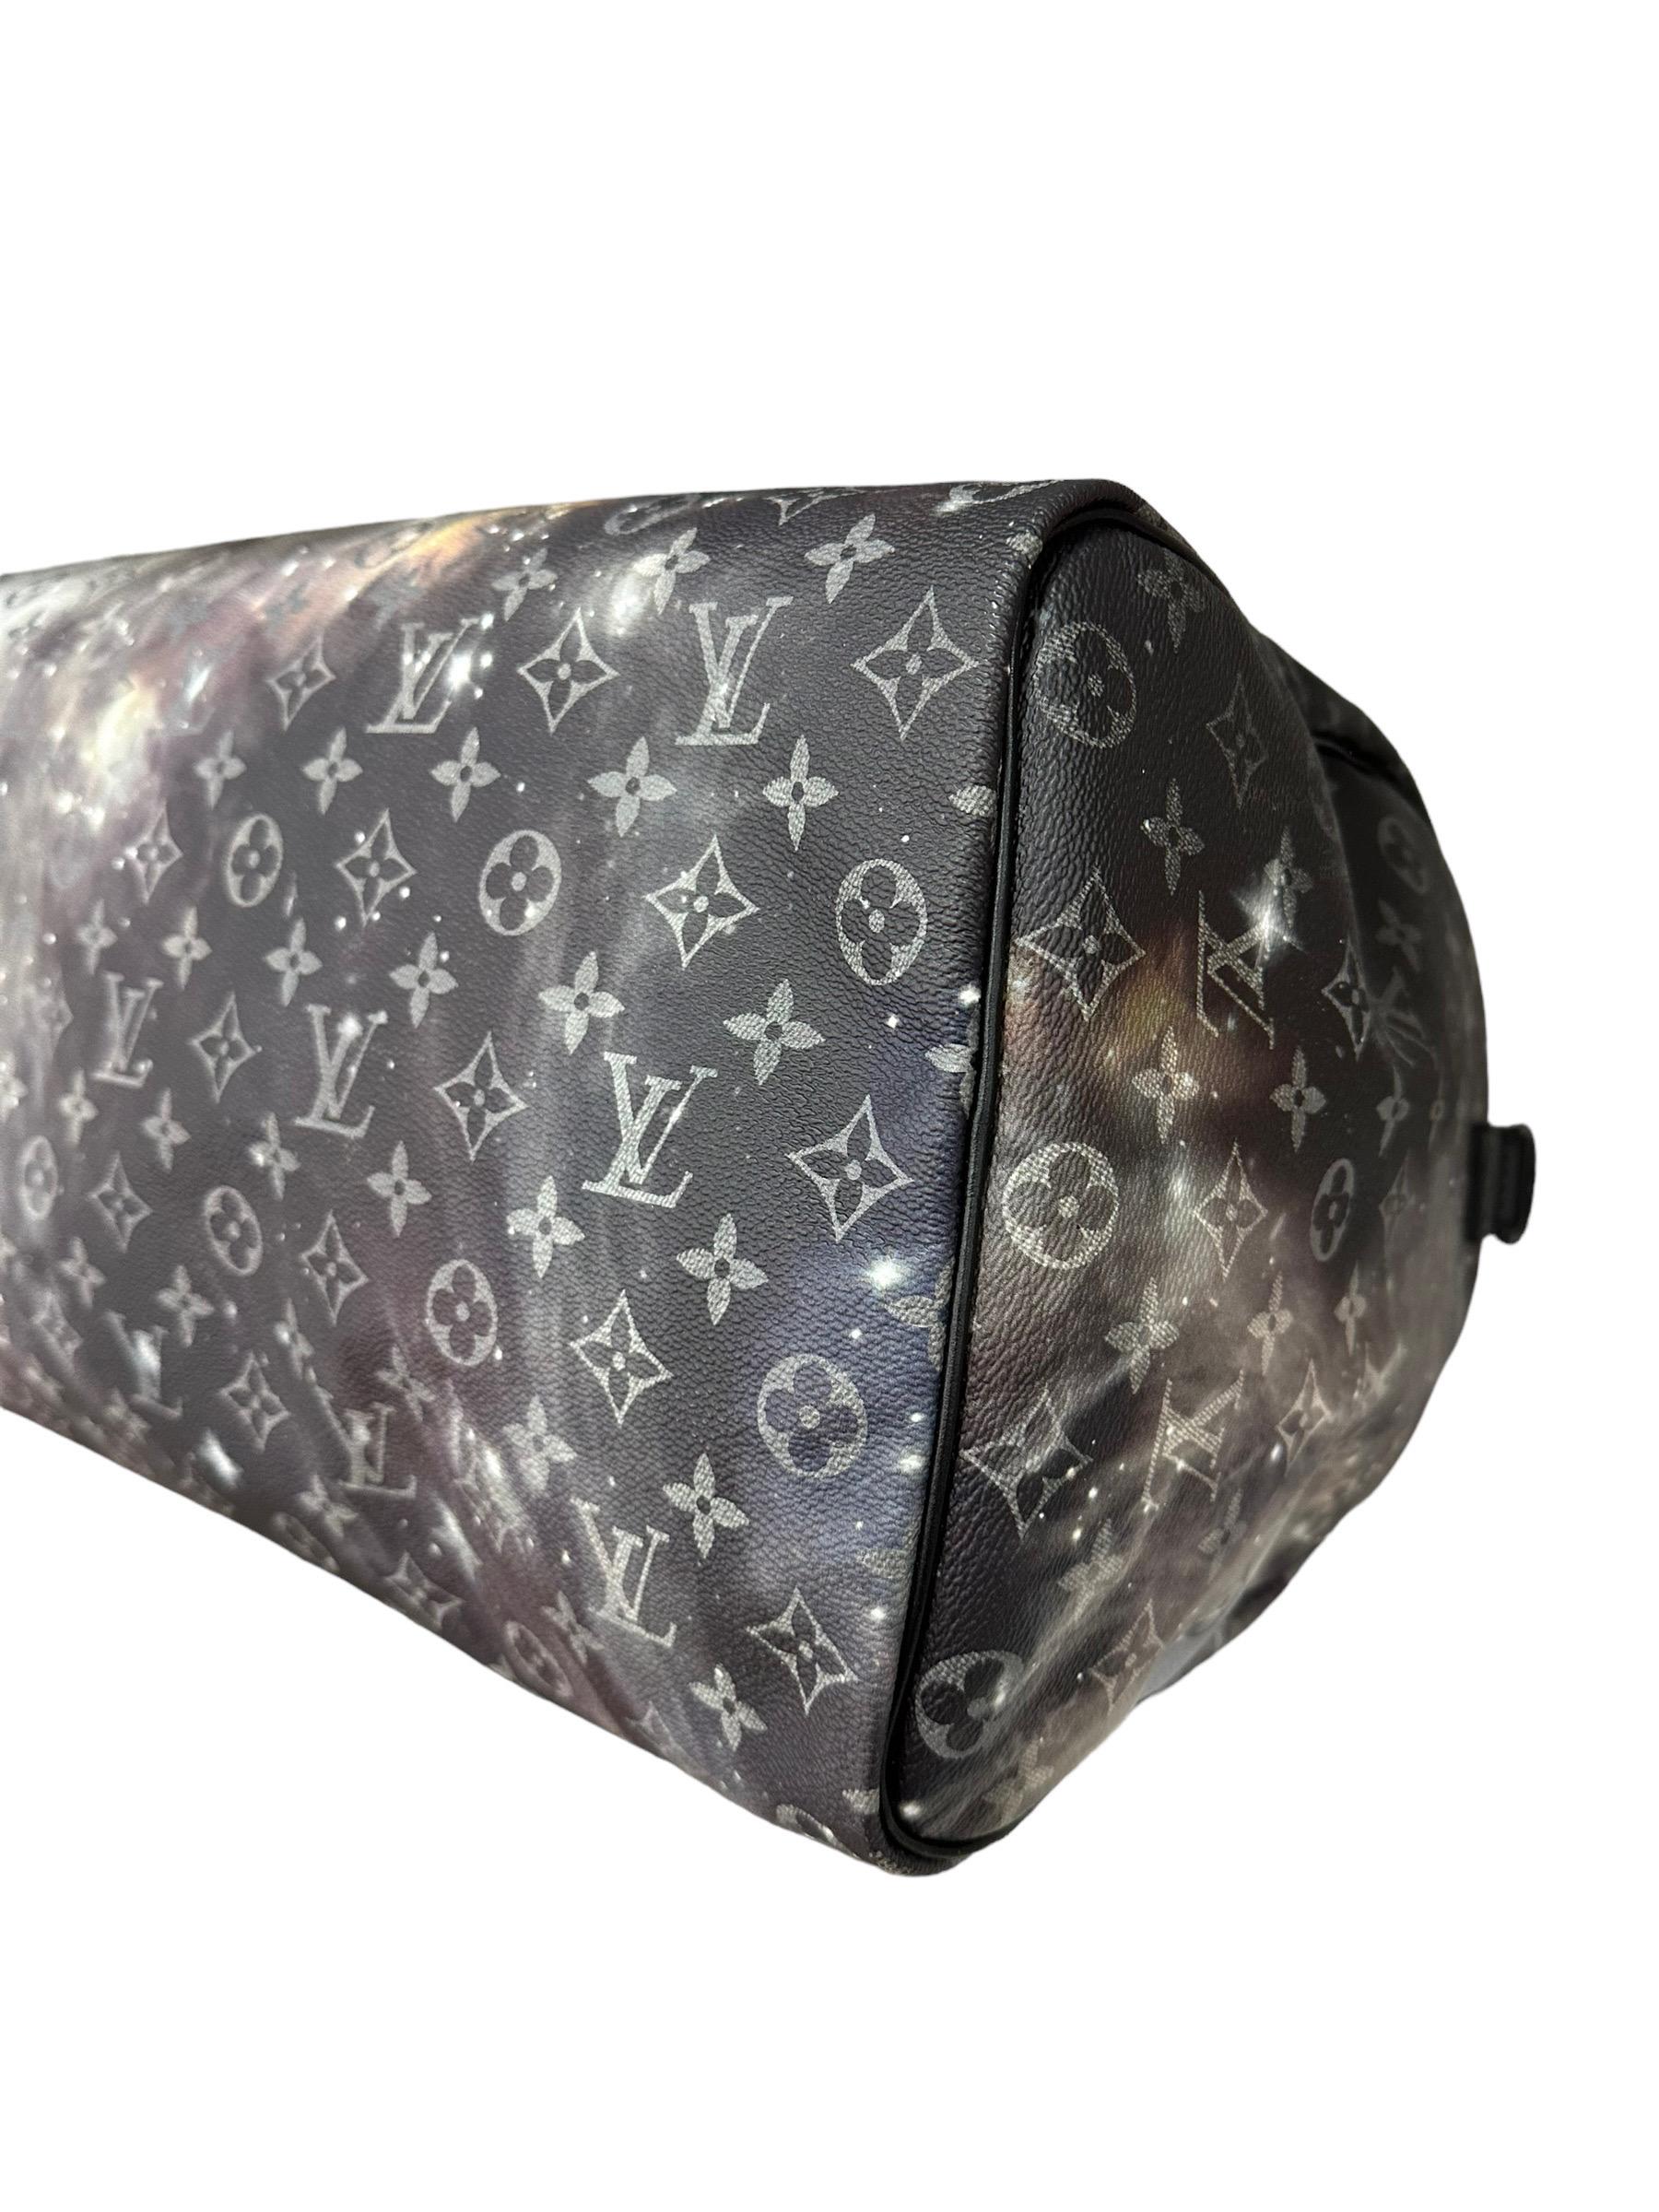 Louis Vuitton Galaxy Keepall Bandouliere 50 Limited Edition Travel Bag For Sale 8